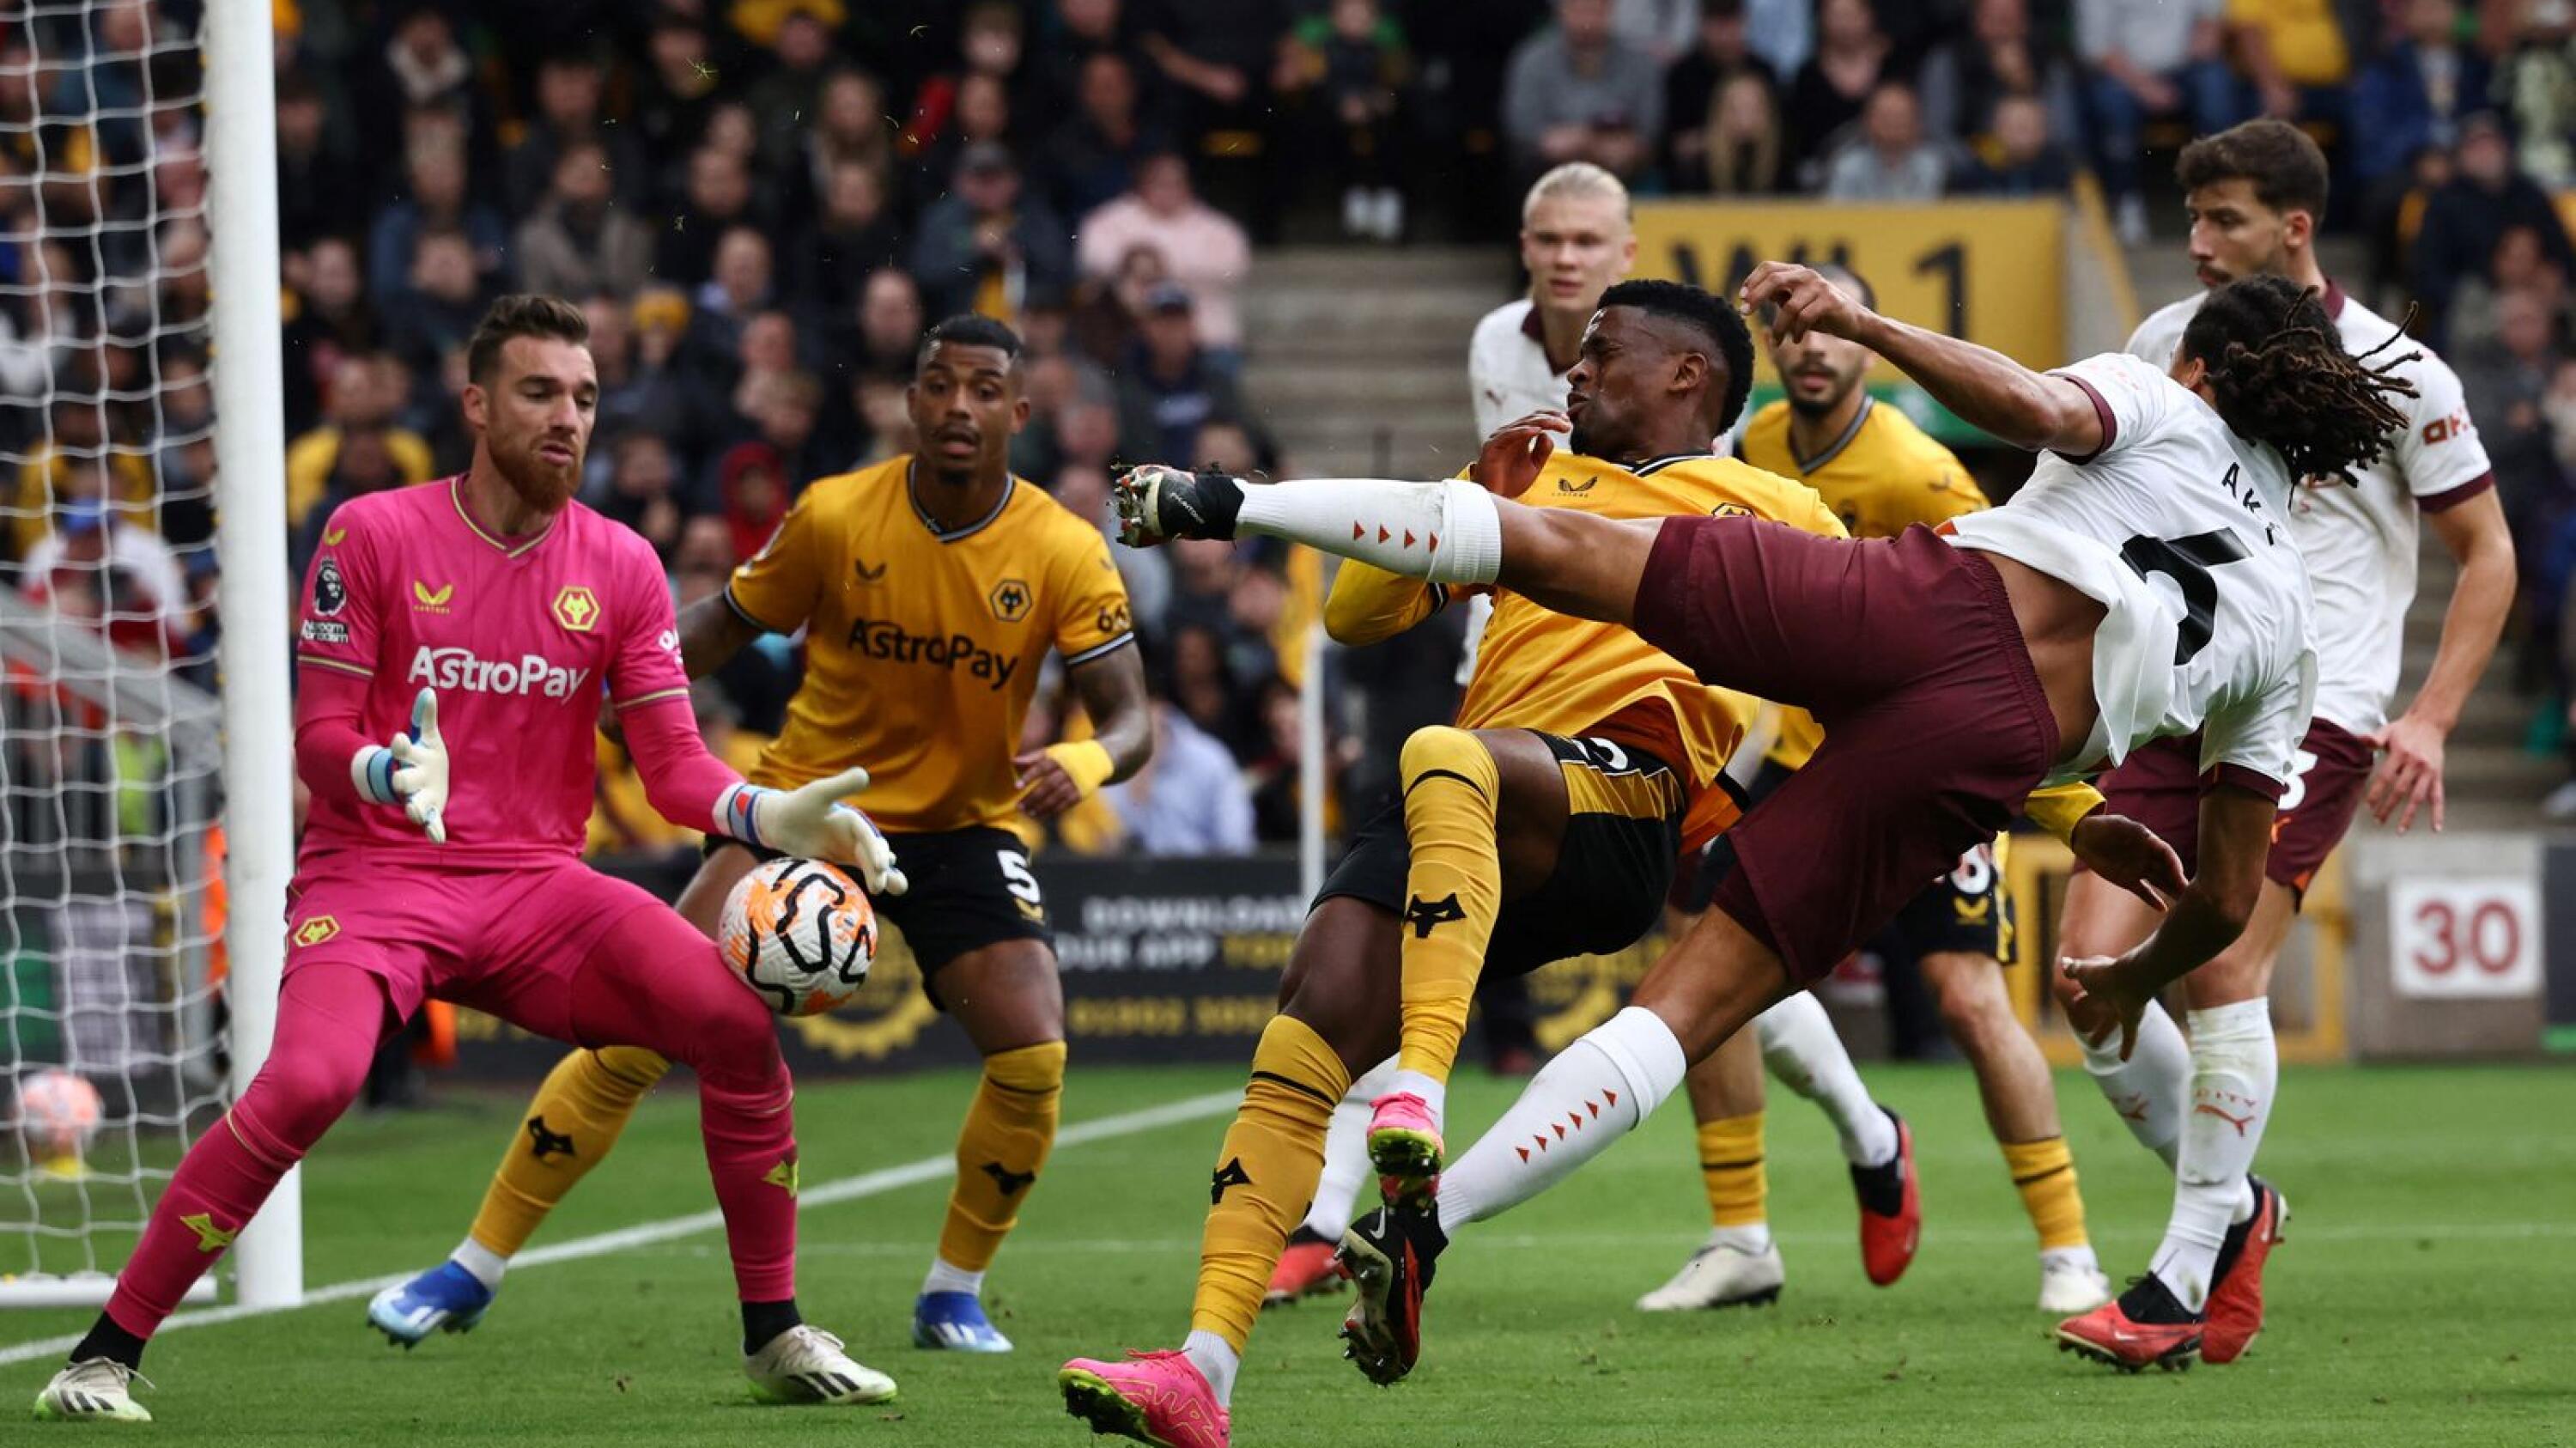 Manchester City's Nathan Ake shoots the ball but it's stopped by Wolverhampton Wanderers' Jose Sa